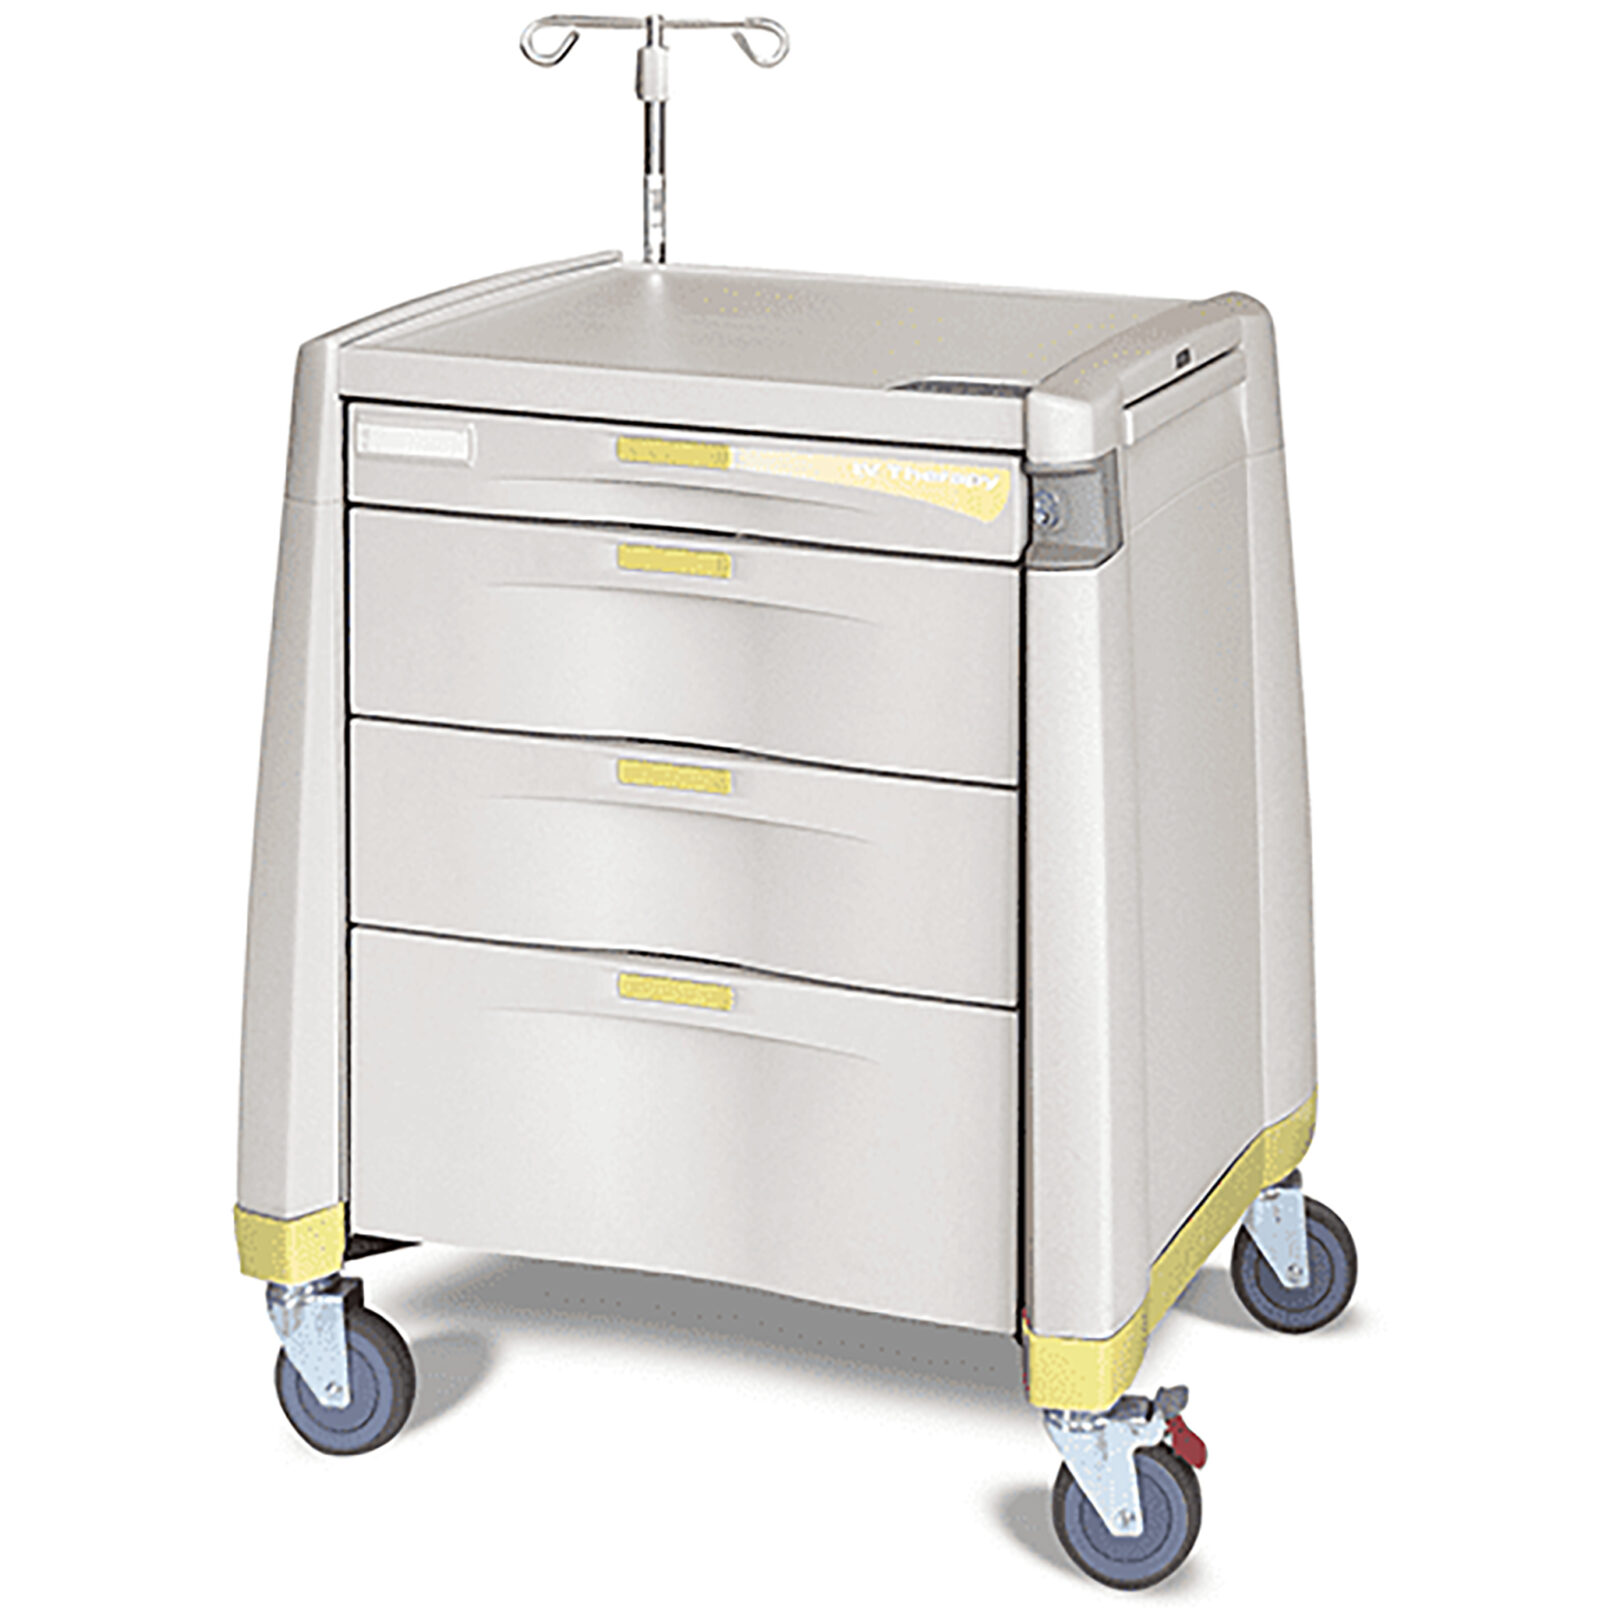 Avalo® IV Therapy Cart